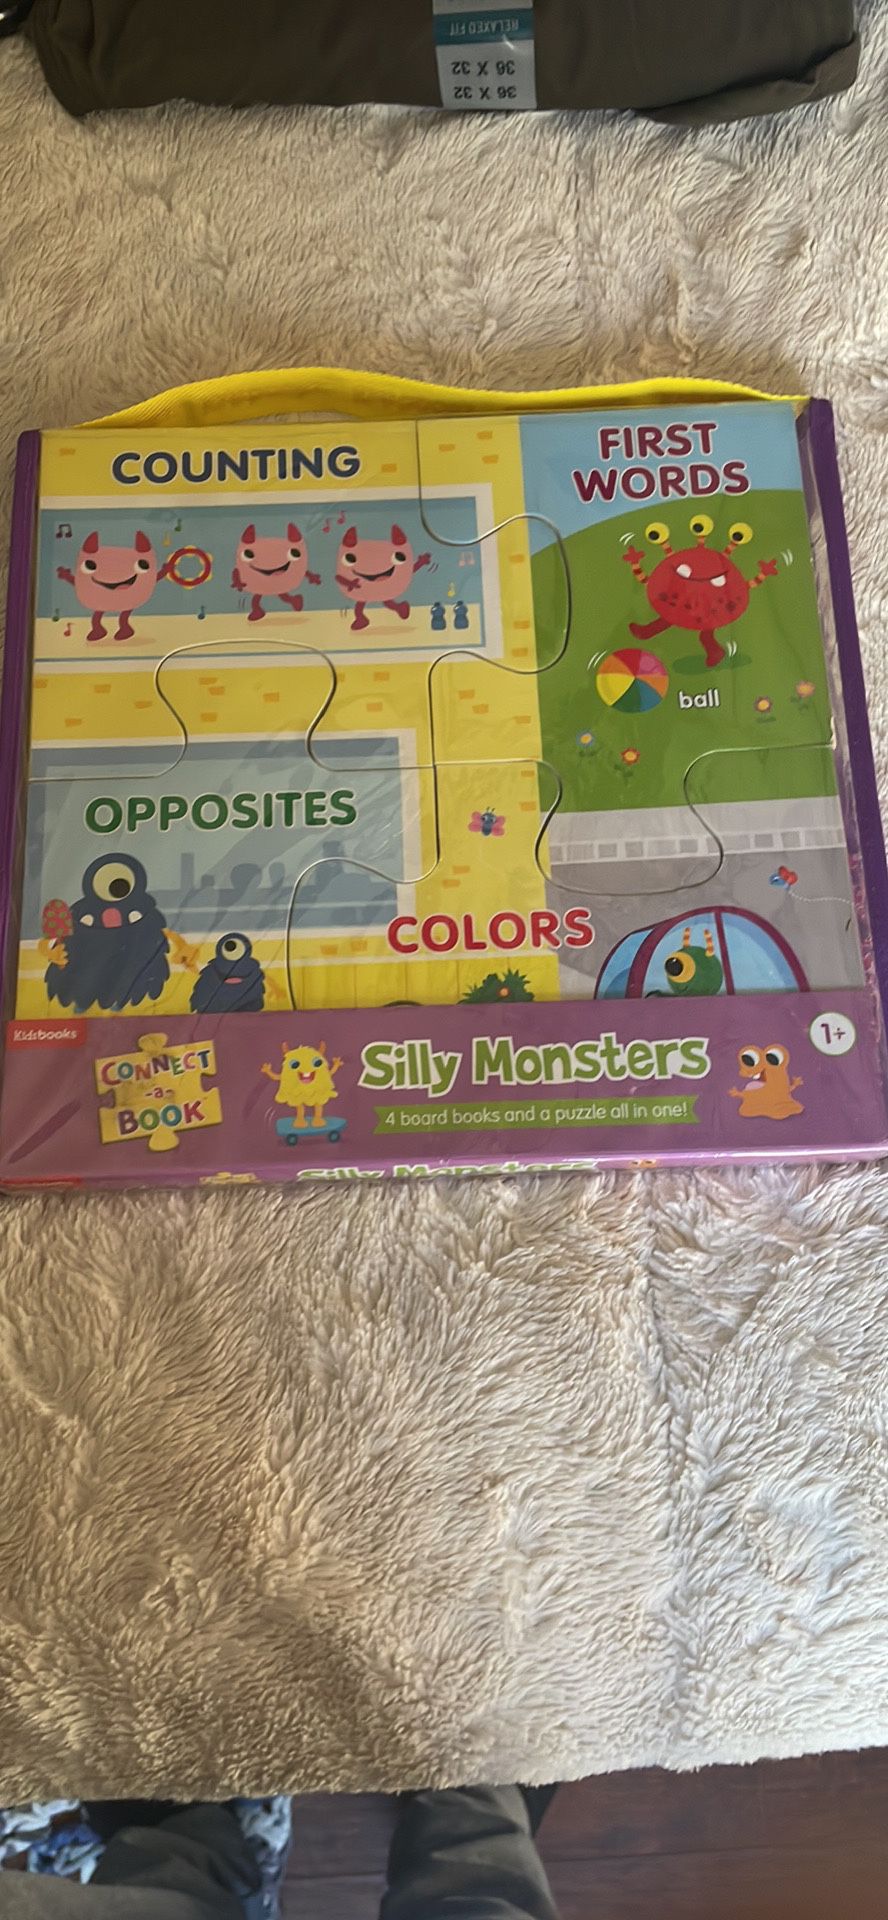 Silly Monsters (4 board books and a puzzle all in one